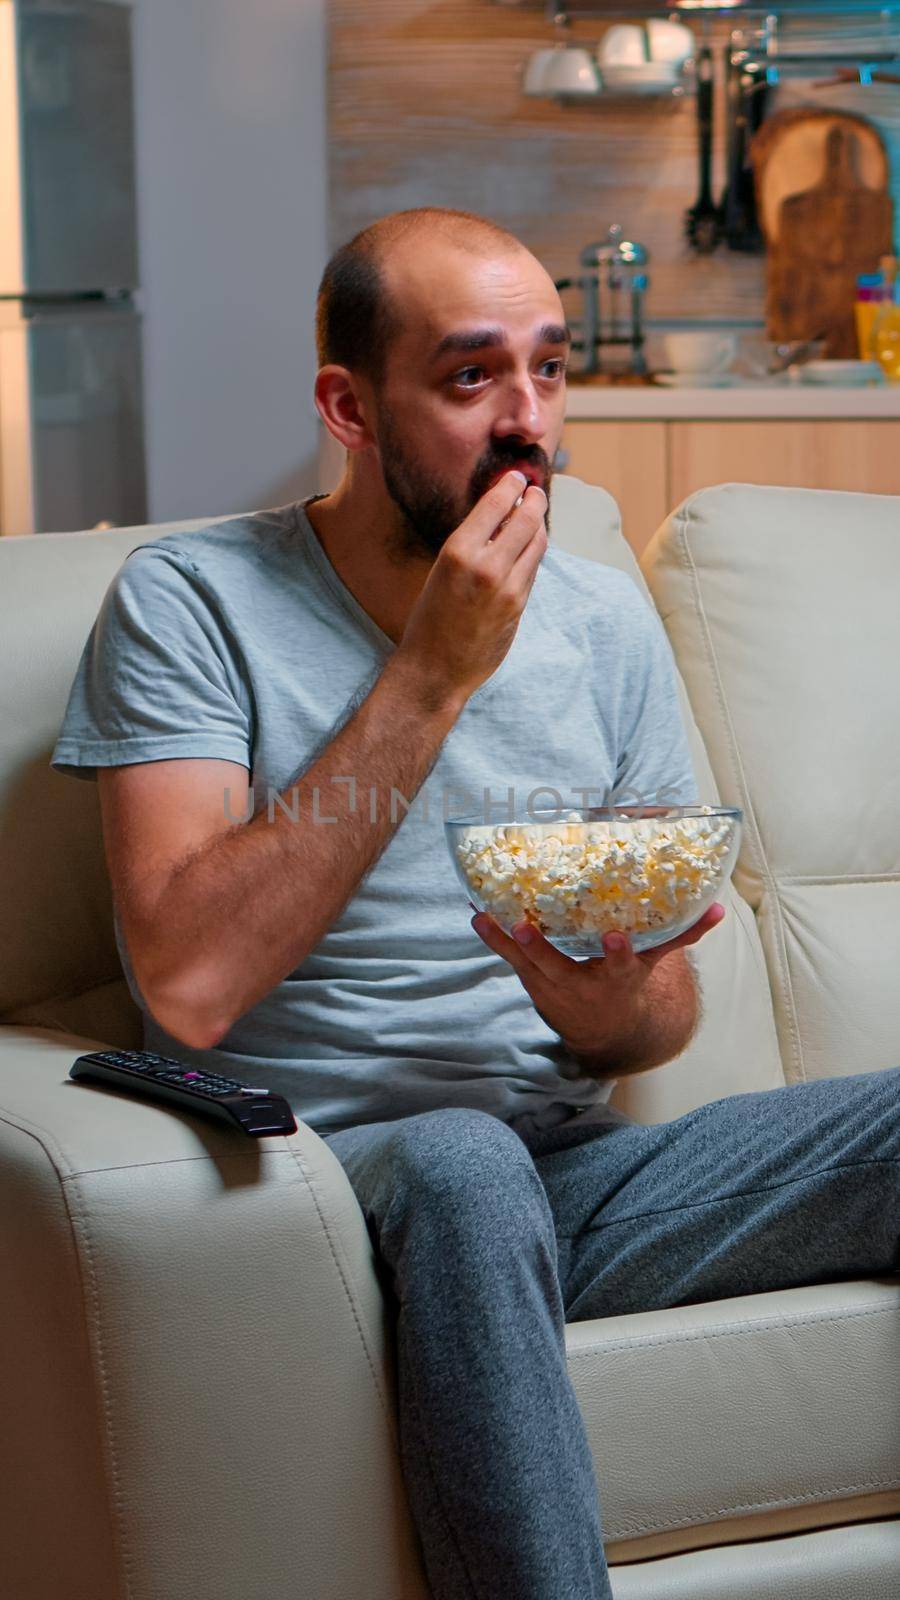 Sport football fan watching game late at night while enjoying popcorn, cheering for favourite football team. Championship entertainment match alone television, soccer fan looking at competition